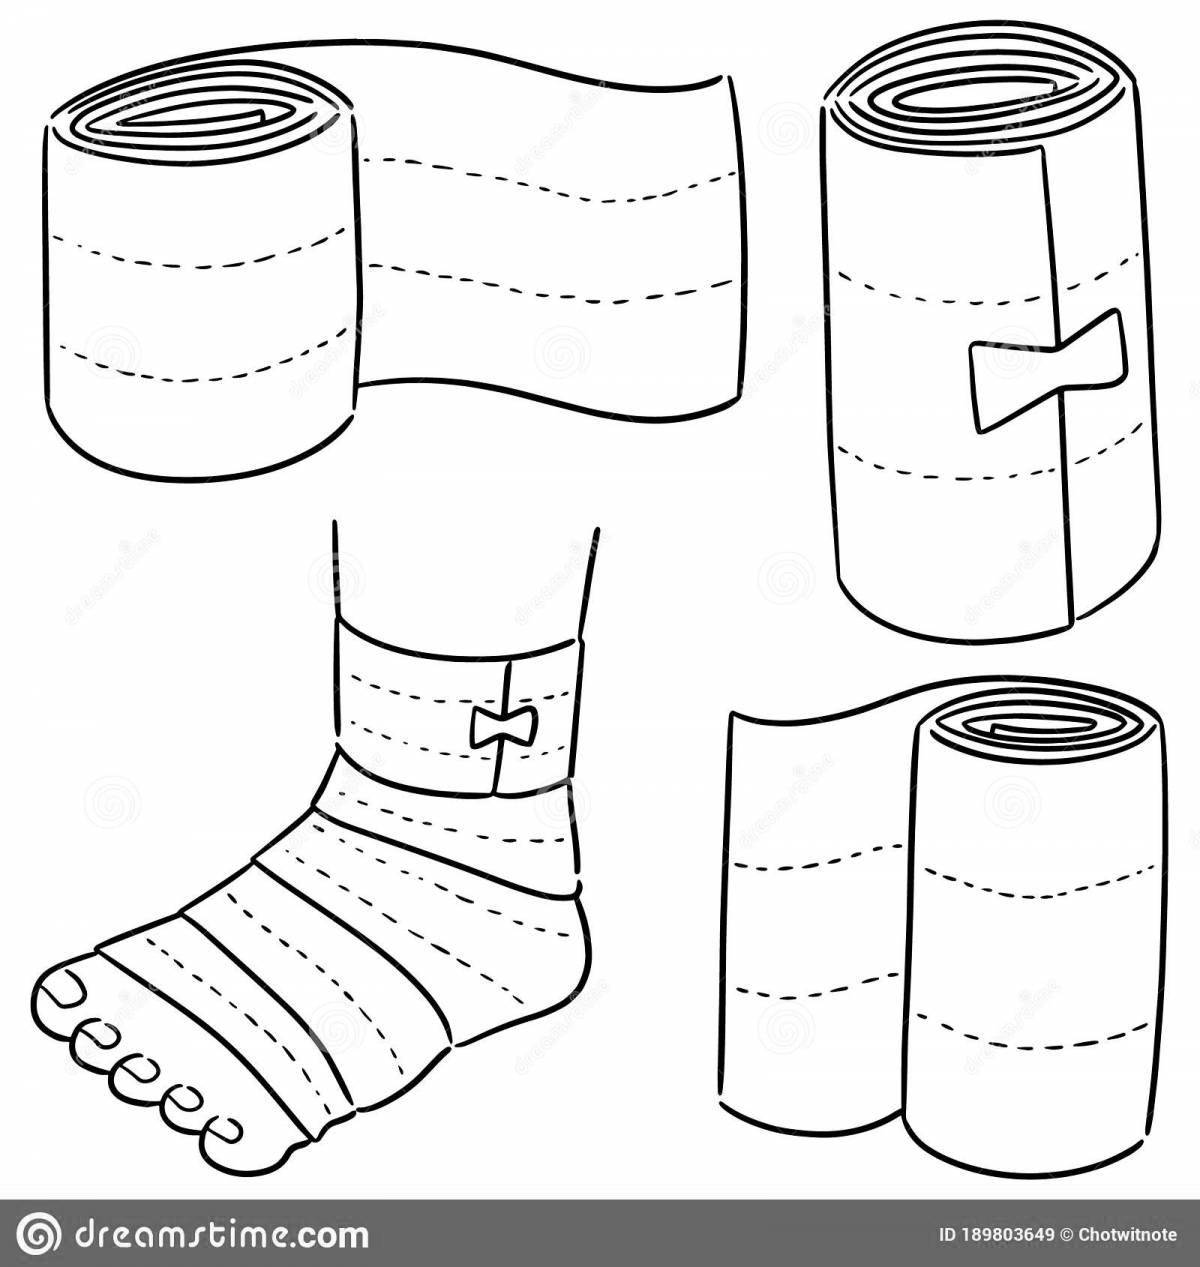 Colorful bandage coloring page